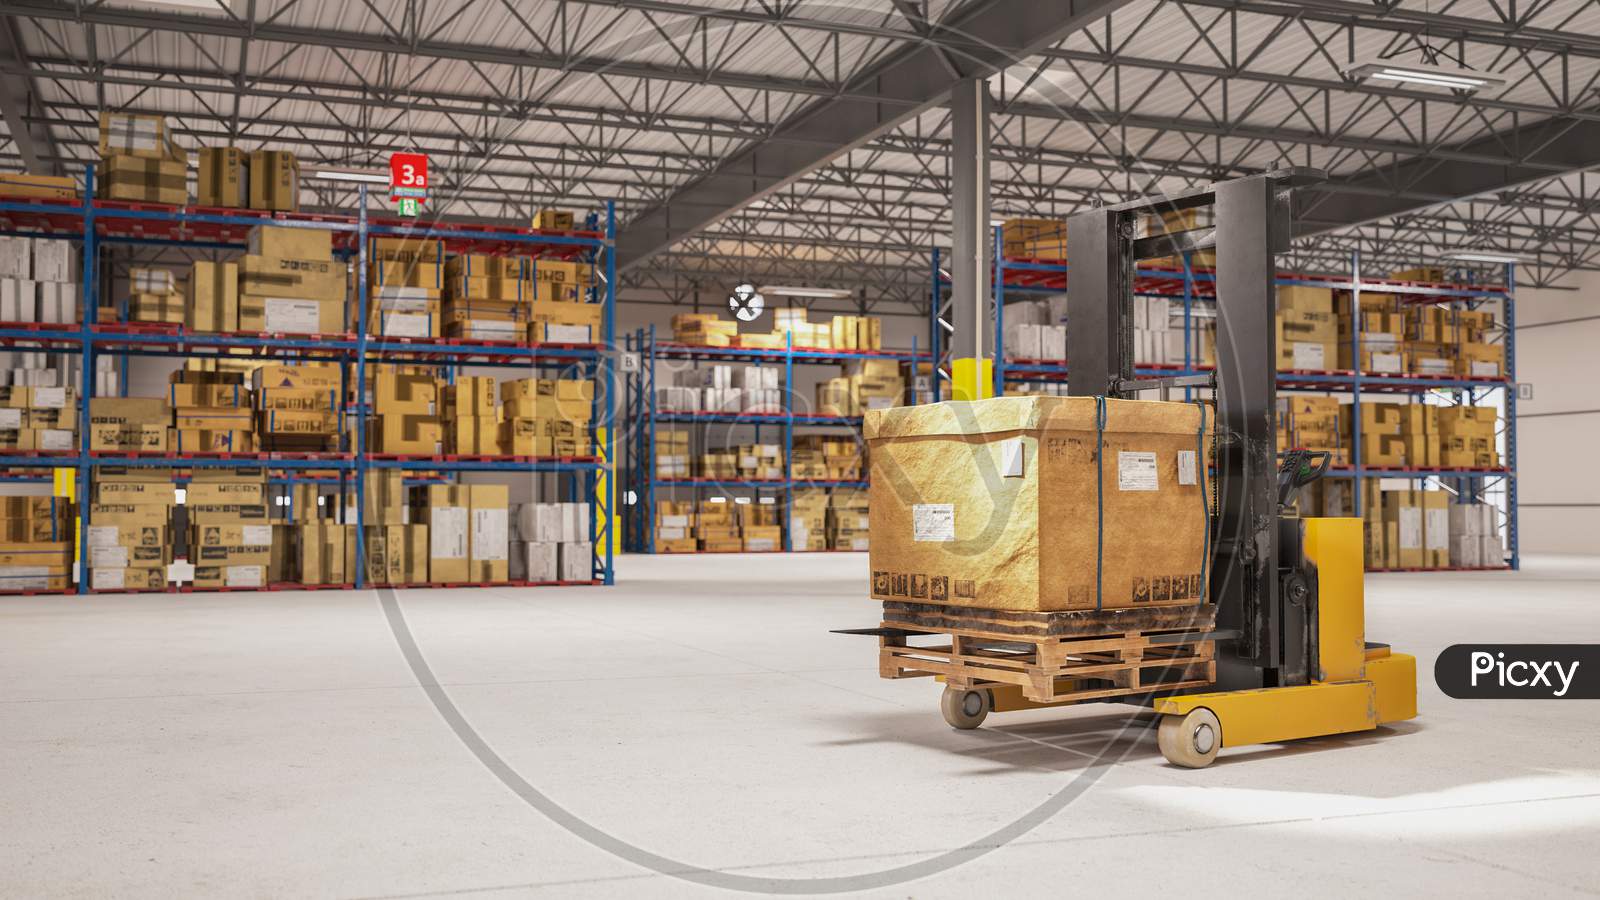 Electric Stacker Hand Pallet Lift Lifting Carton Package For Customer Delivery In Storage Warehouse. Business And Logistics Concept. Vehicle Transportation Shipping Industry. 3D Illustration Rendering